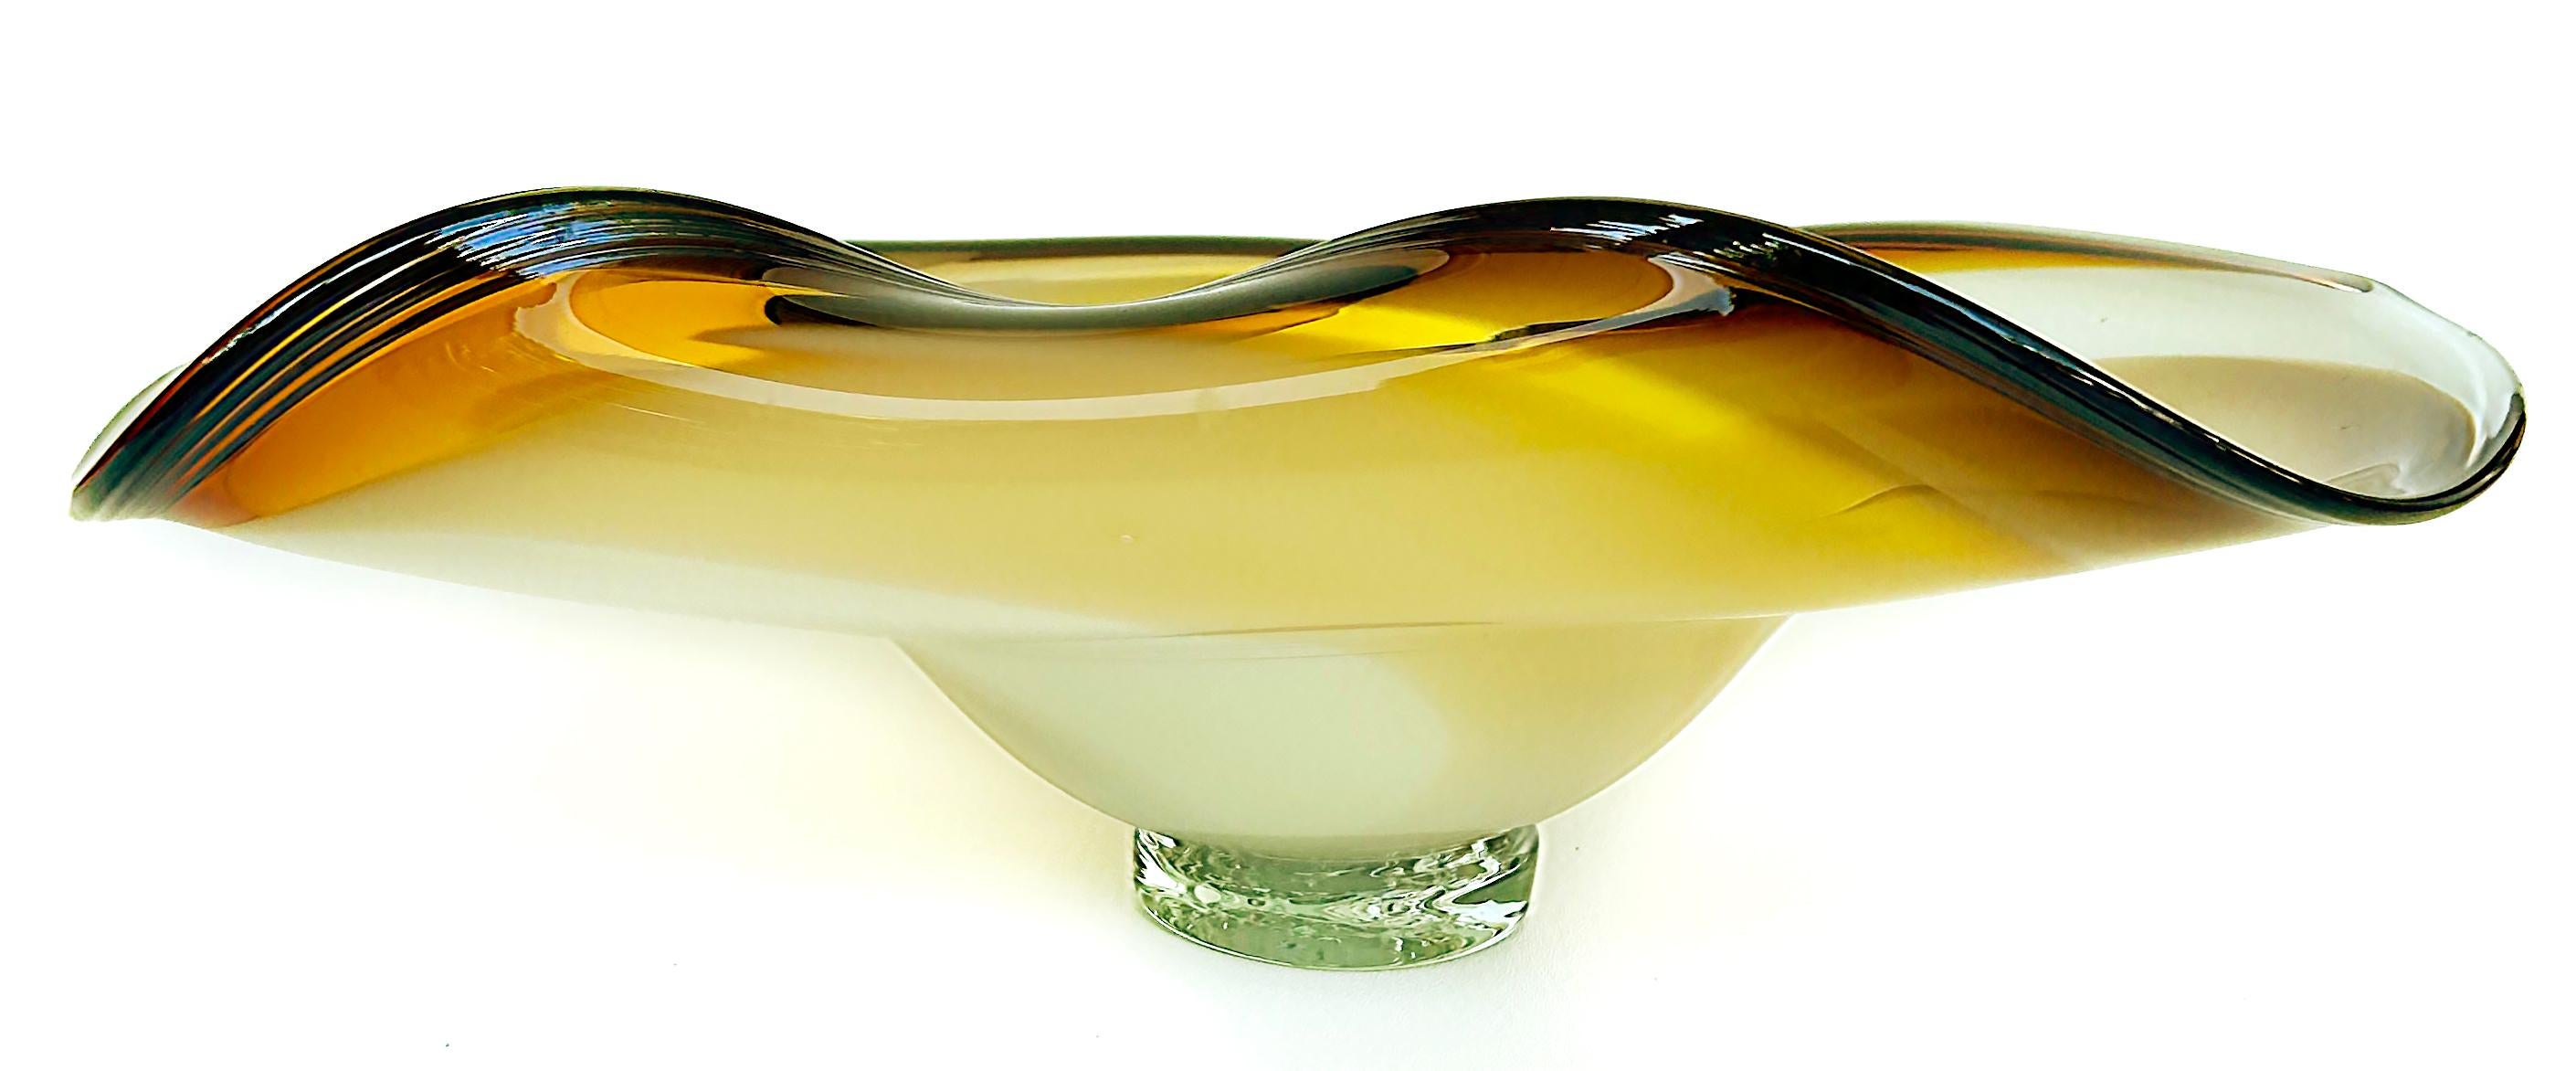 2006 Art Glass Centerpiece Bowl by John Nicholson Signed on Base, “The Wave”  For Sale 1